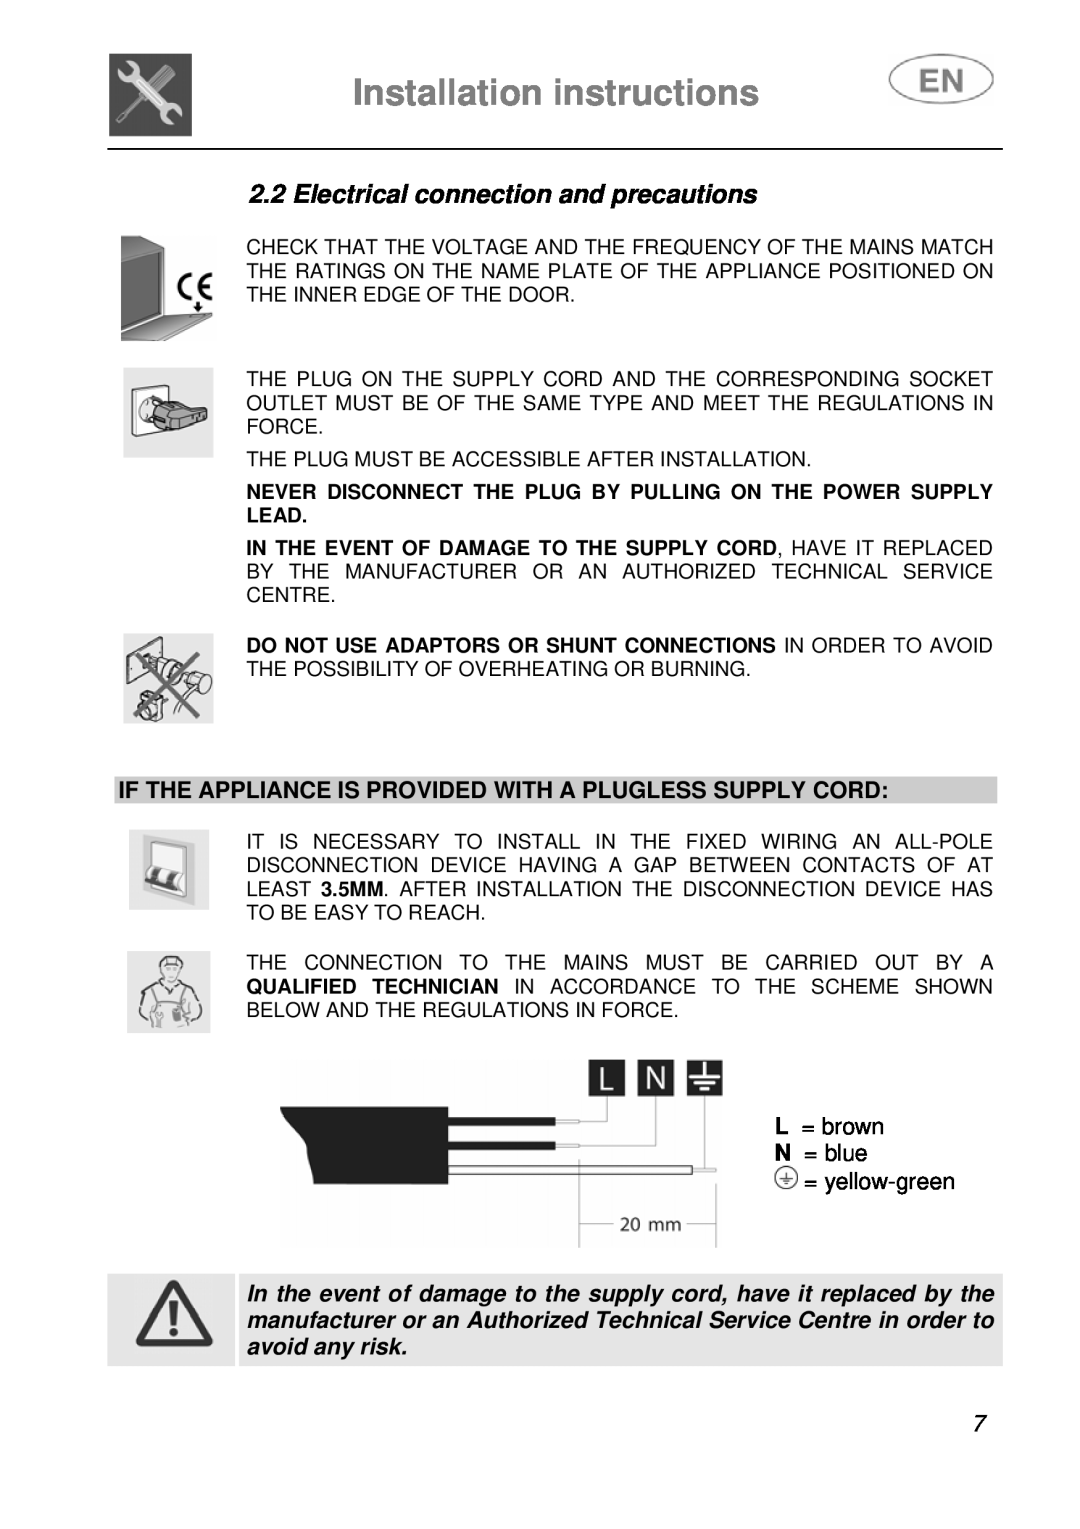 Smeg EN instruction manual Electrical connection and precautions, If The Appliance Is Provided With A Plugless Supply Cord 